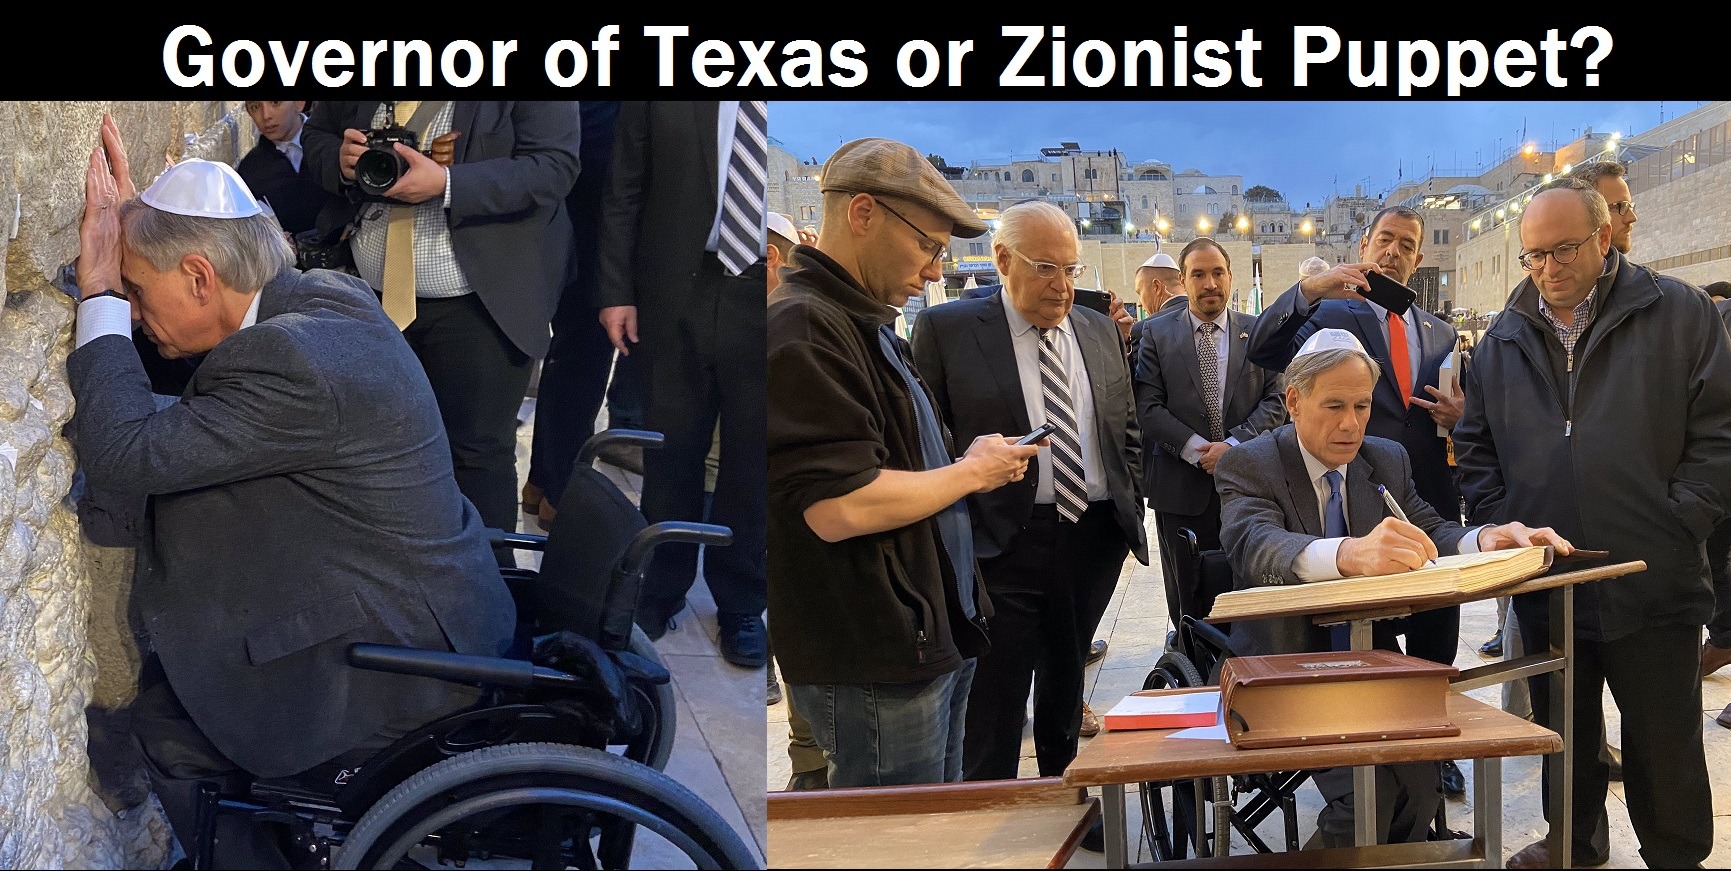 Governor of Texas or Zionist Puppet